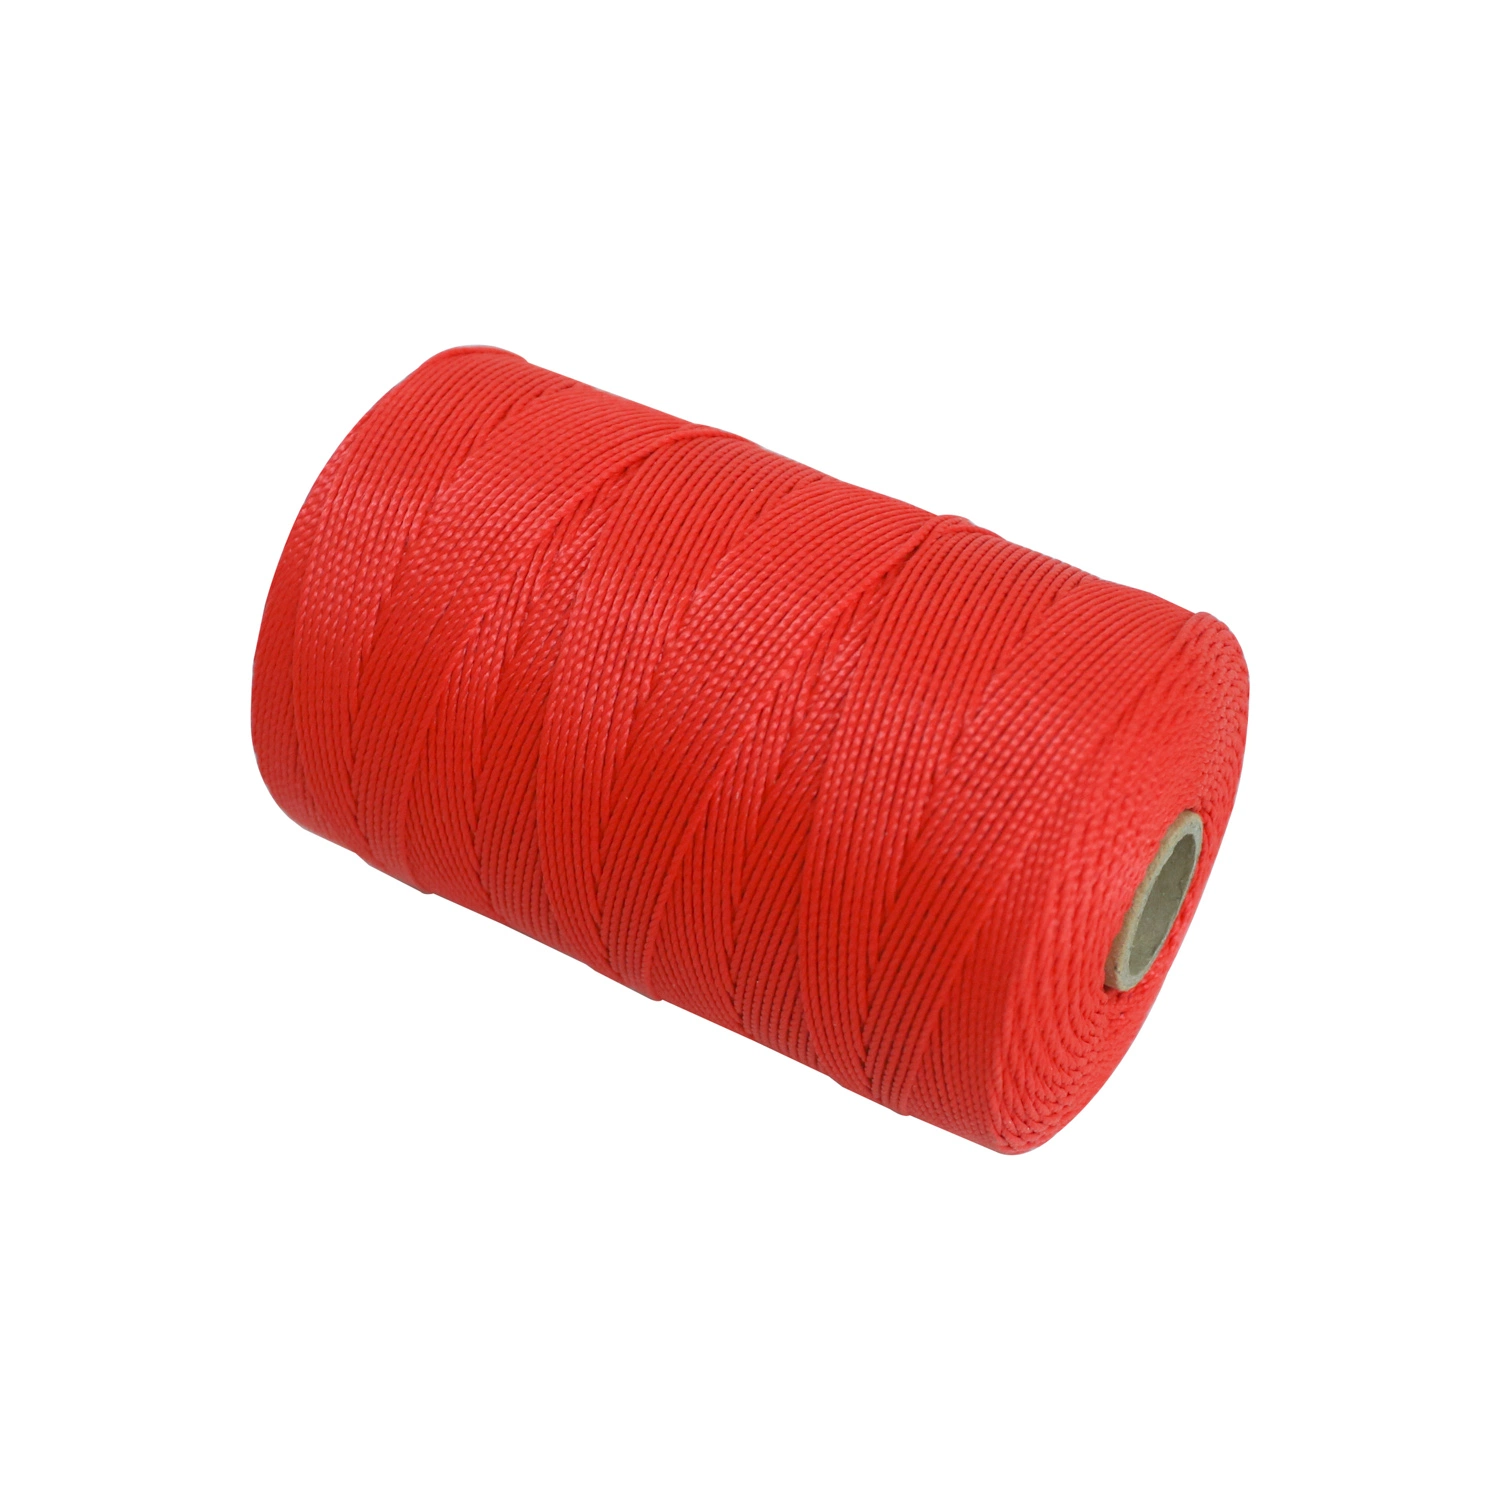 210d/36ply Nylon PP Fishing Twine Red Color